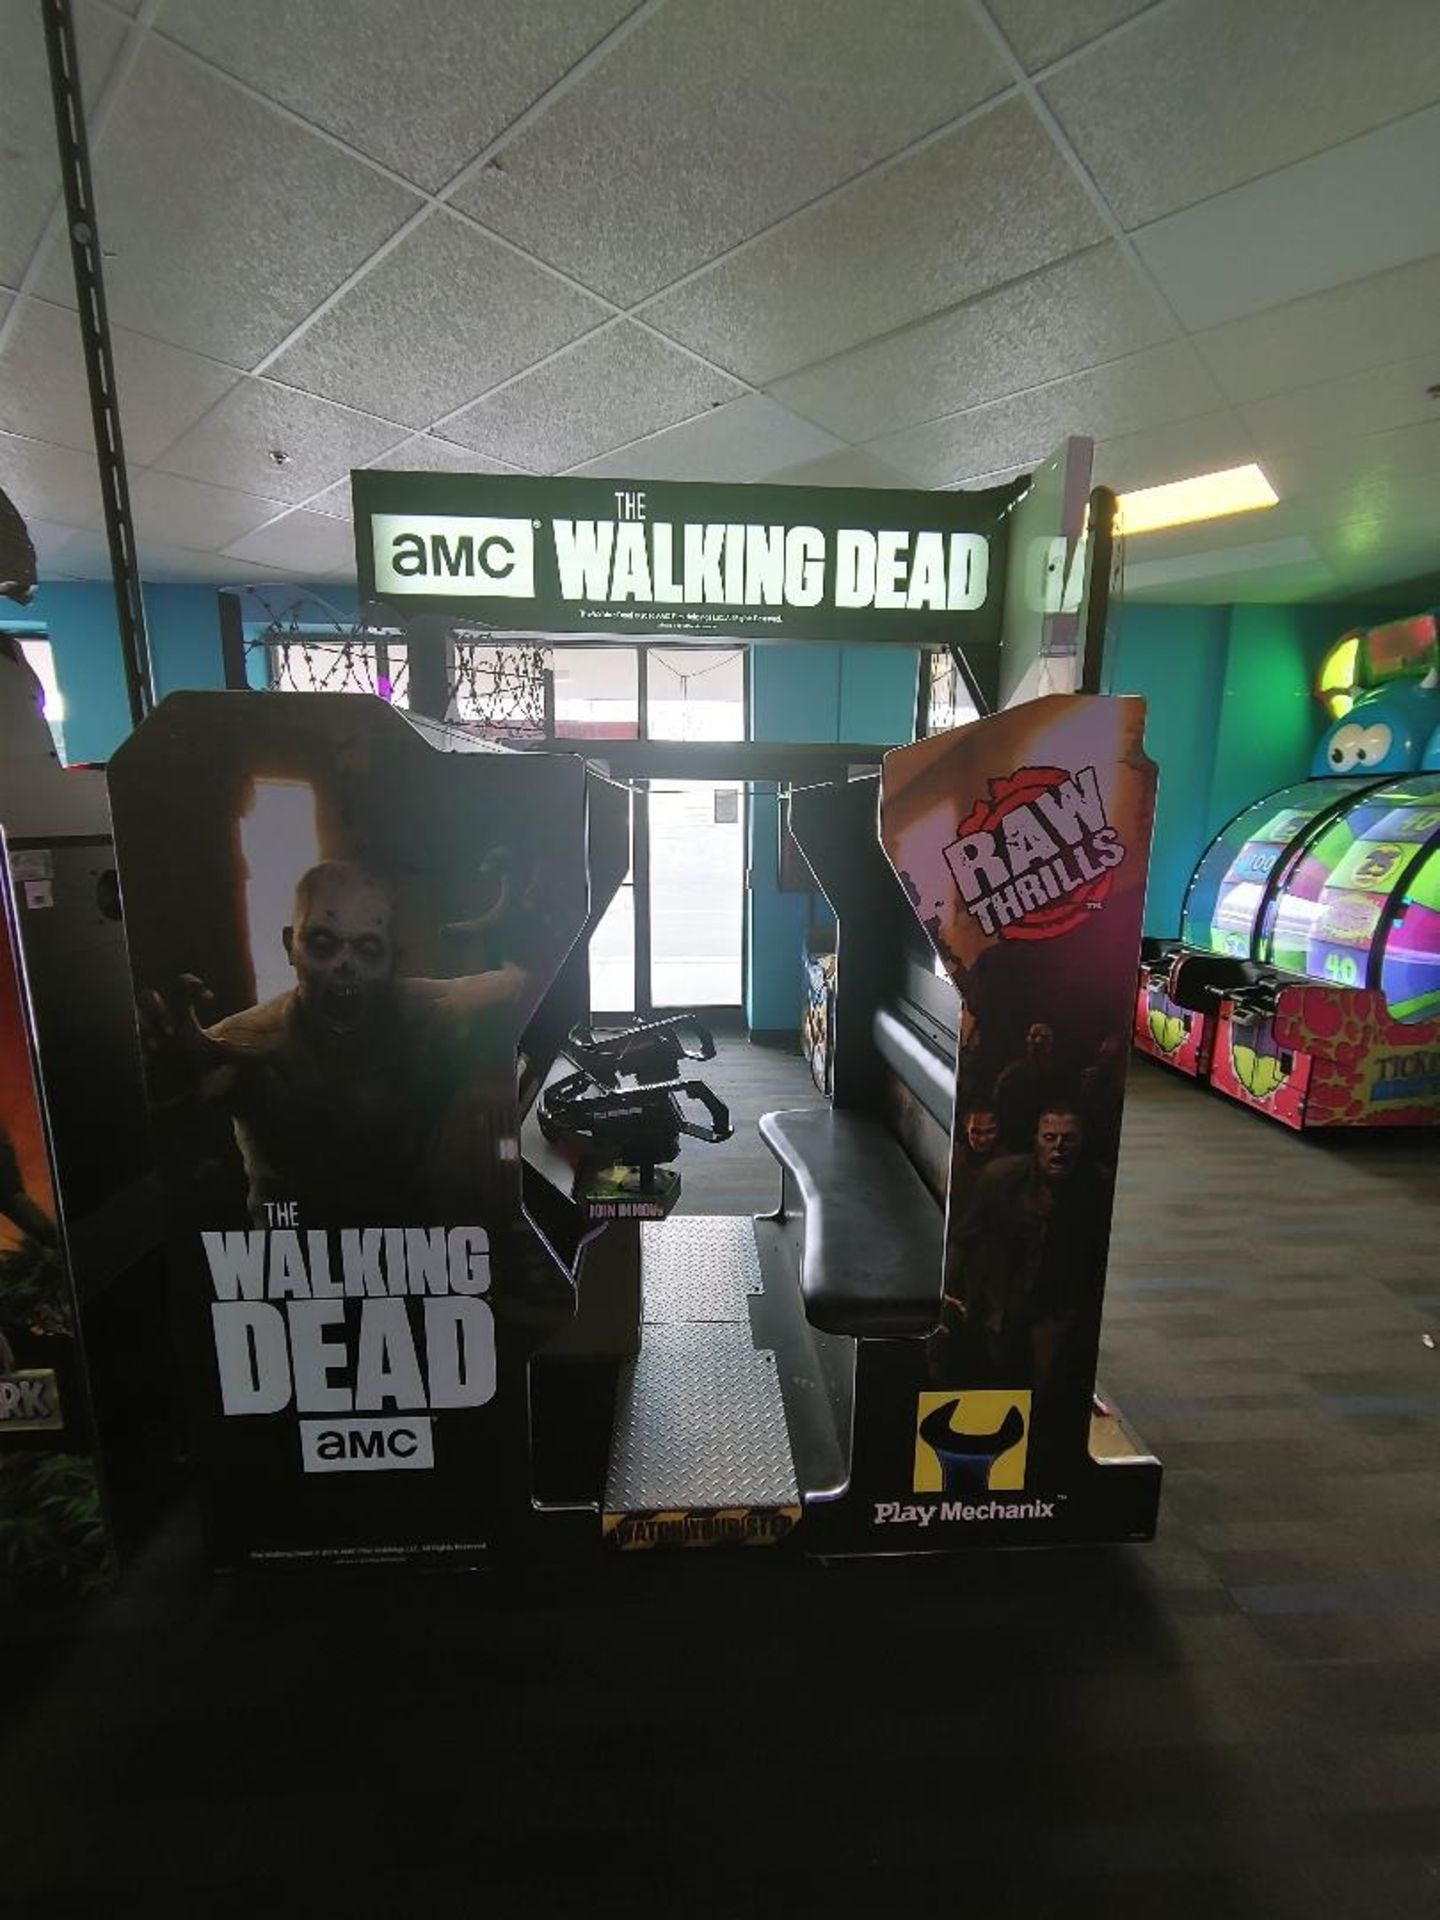 RAW THRILLS INC. THE WALKING DEAD 2 PLAYER SHOOTING ARCADE GAME